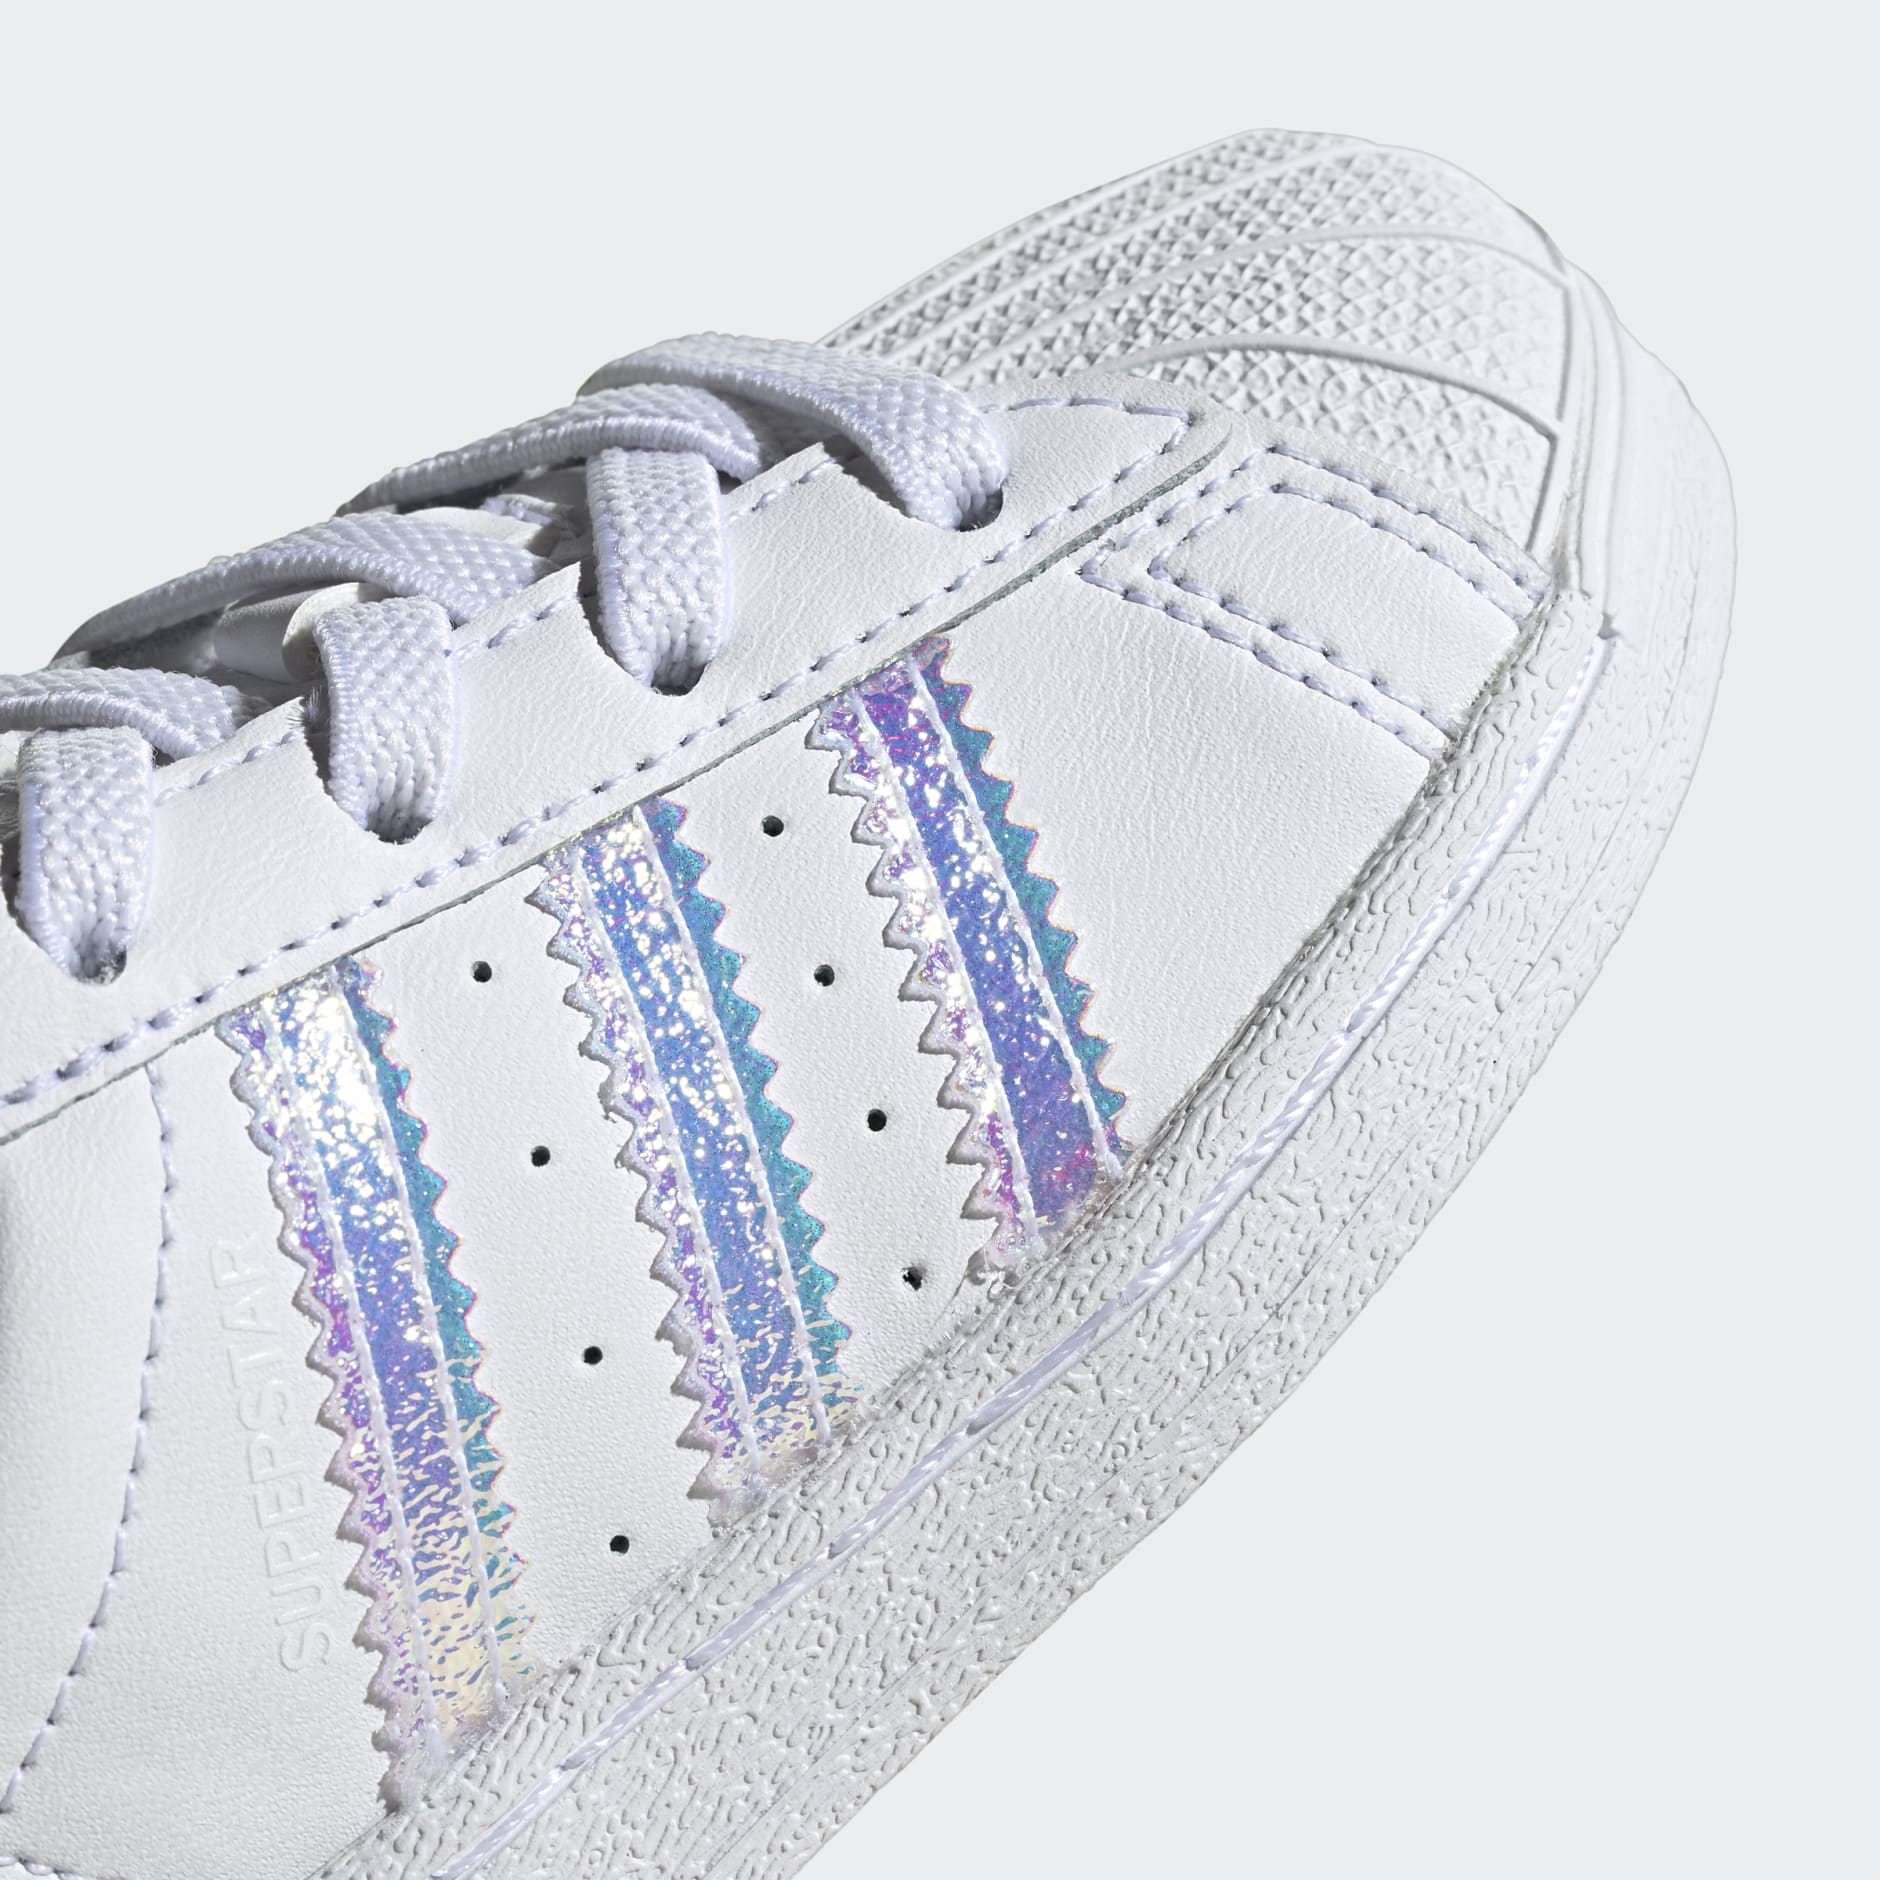 Shoes - Superstar Shoes - White | adidas South Africa